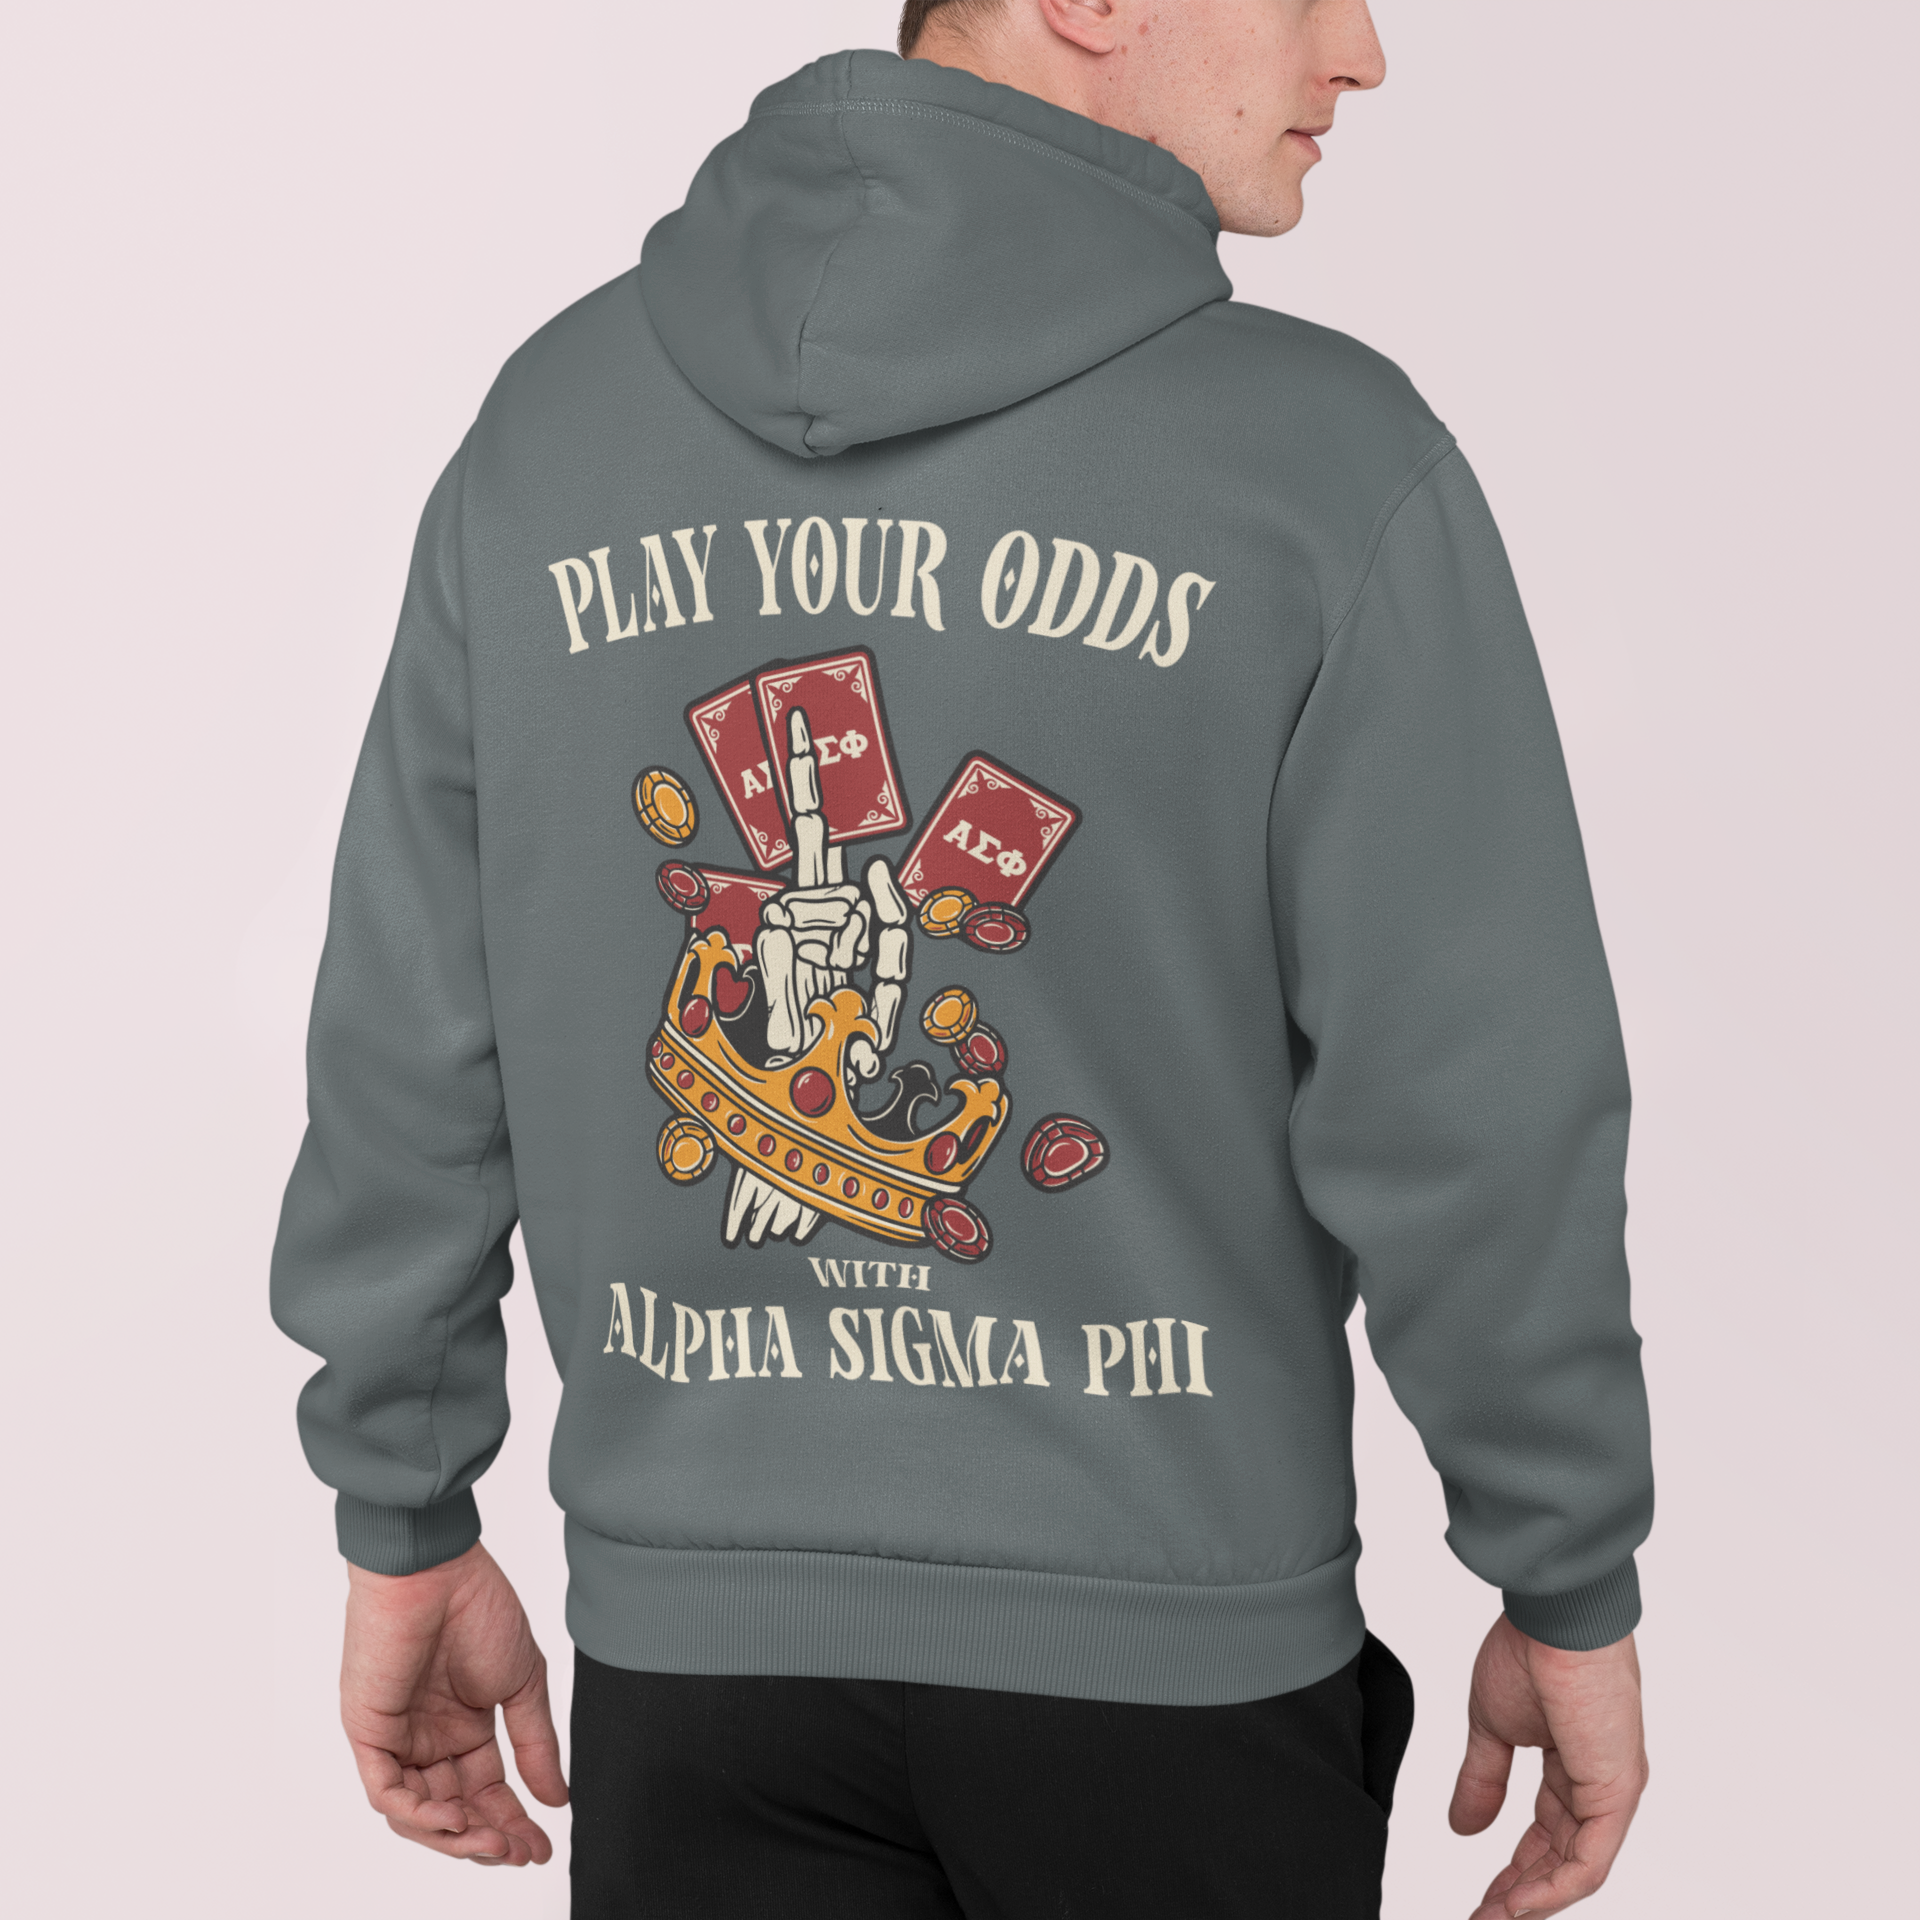 Alpha Sigma Phi Graphic Hoodie | Play Your Odds | Alpha Sigma Phi Fraternity Hoodie back model 